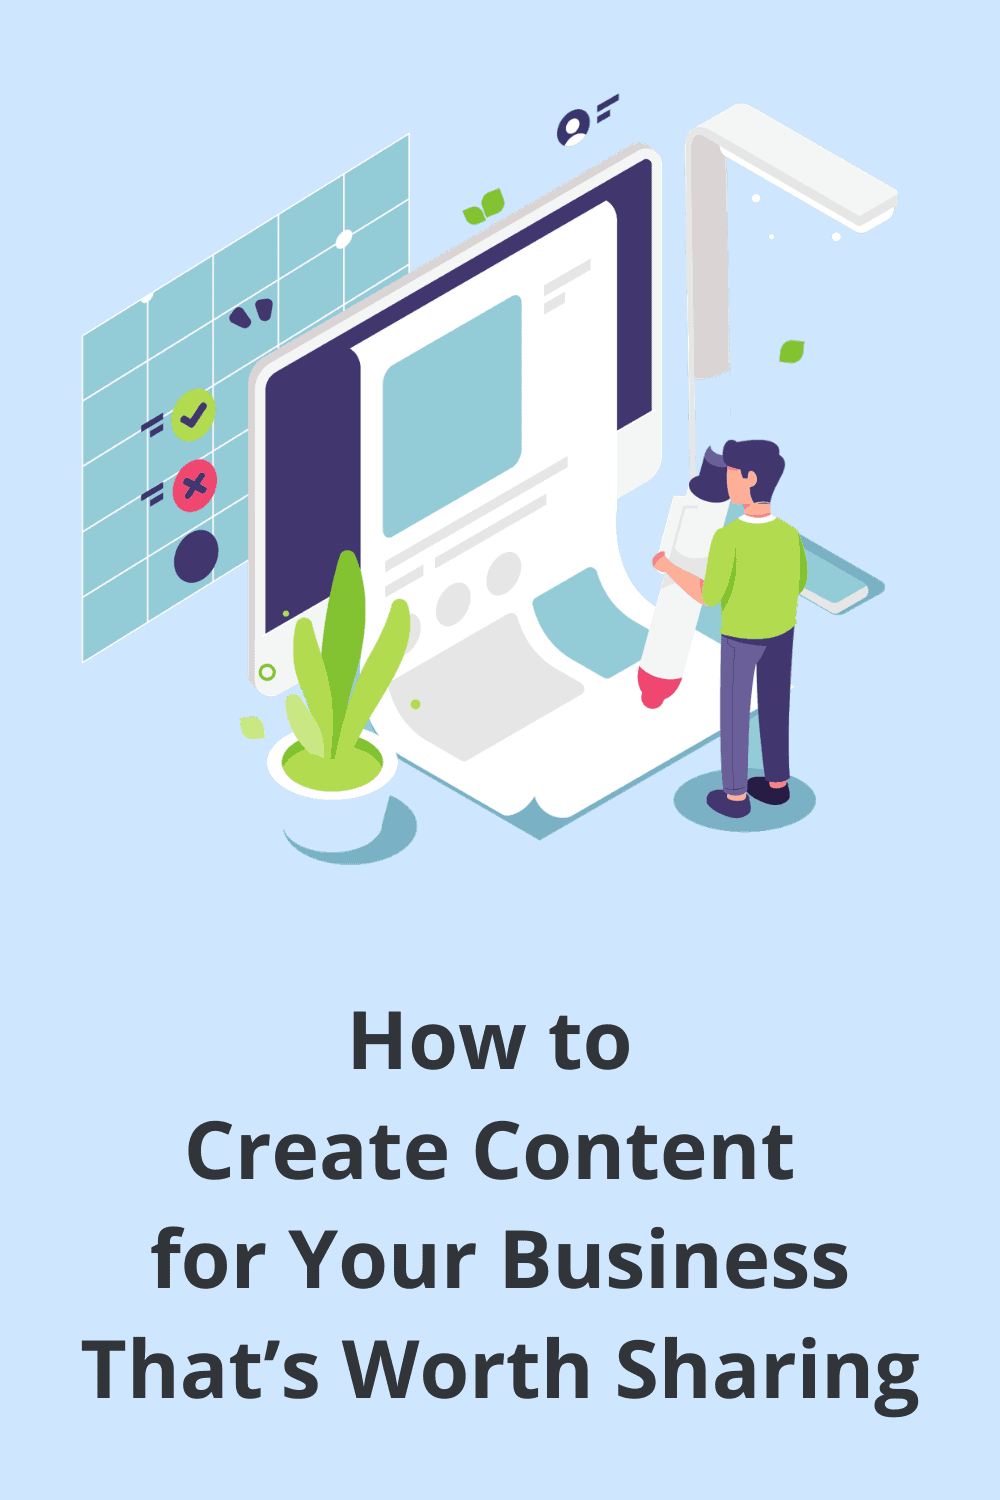 Content is king and all that. But how does a small business create enough good content to reach their marketing goals? via @scopedesign